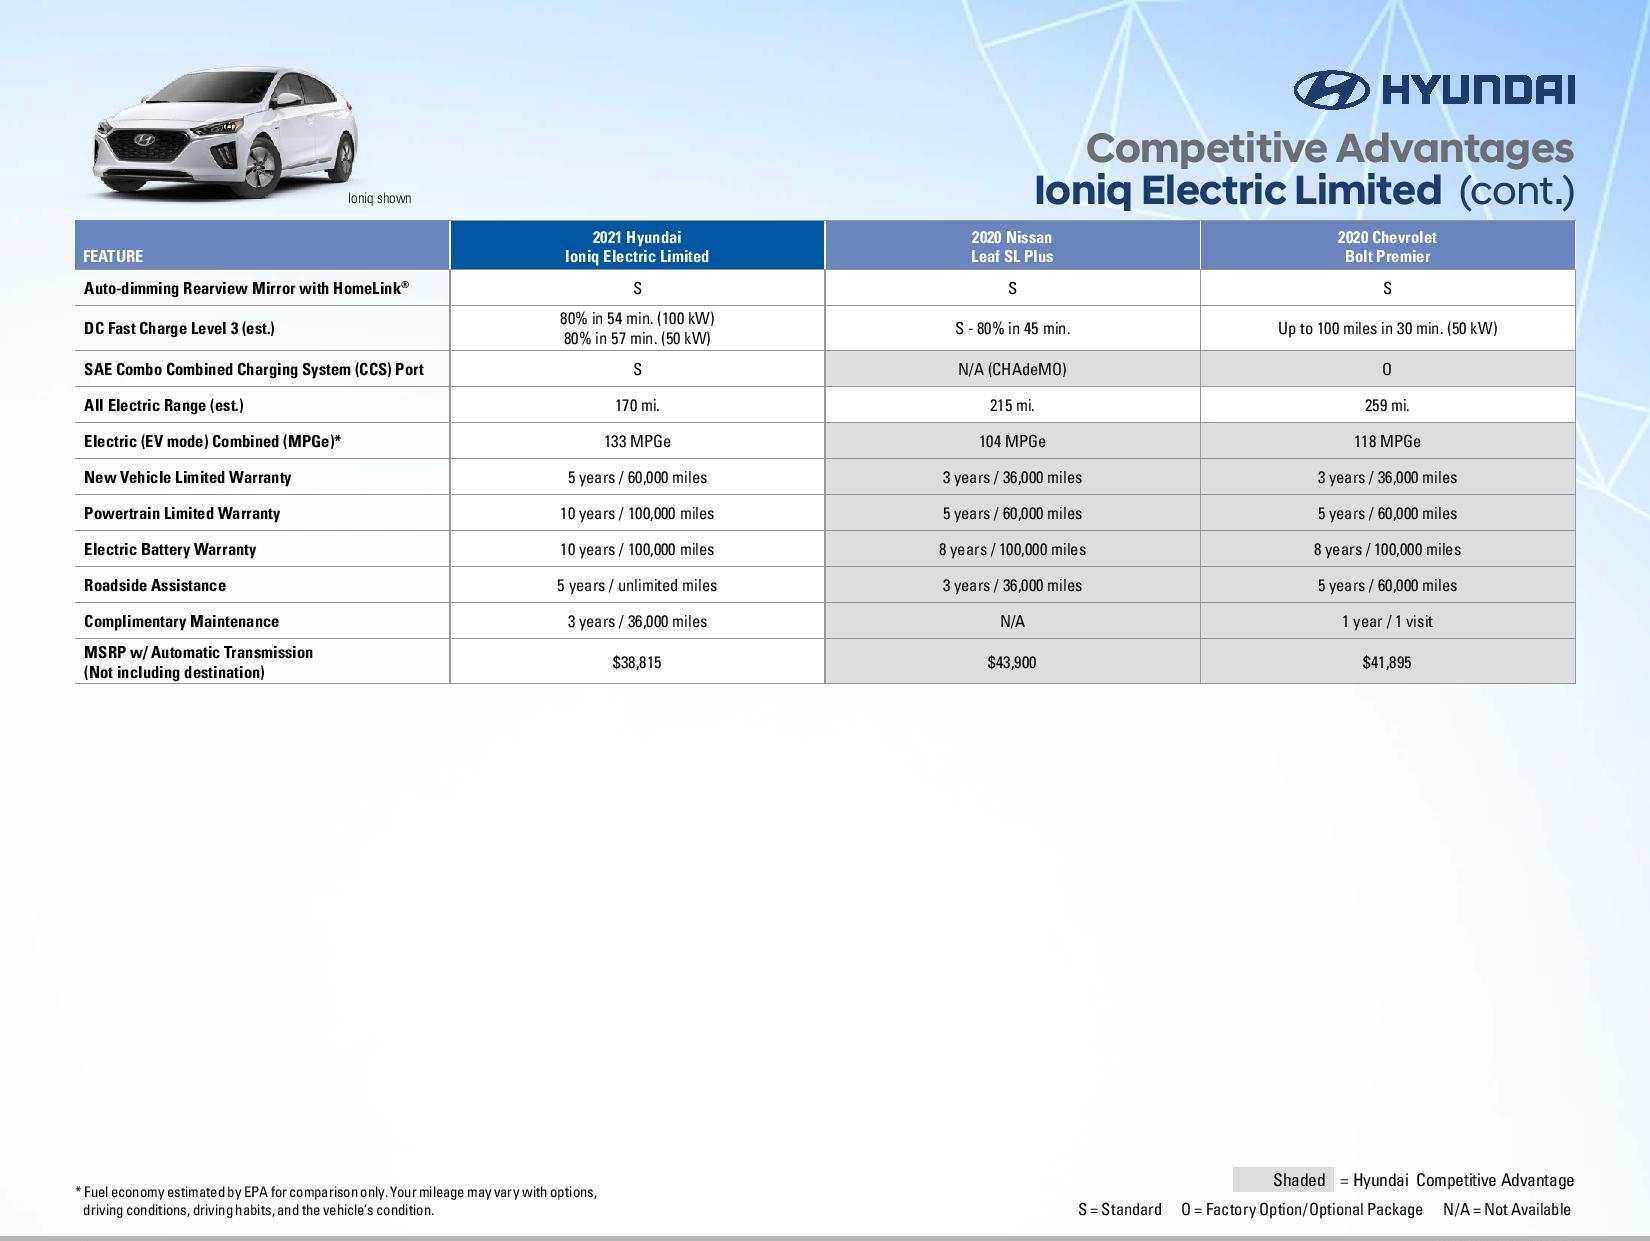 2021 Ionic Electric Competitive Advantage Page 4